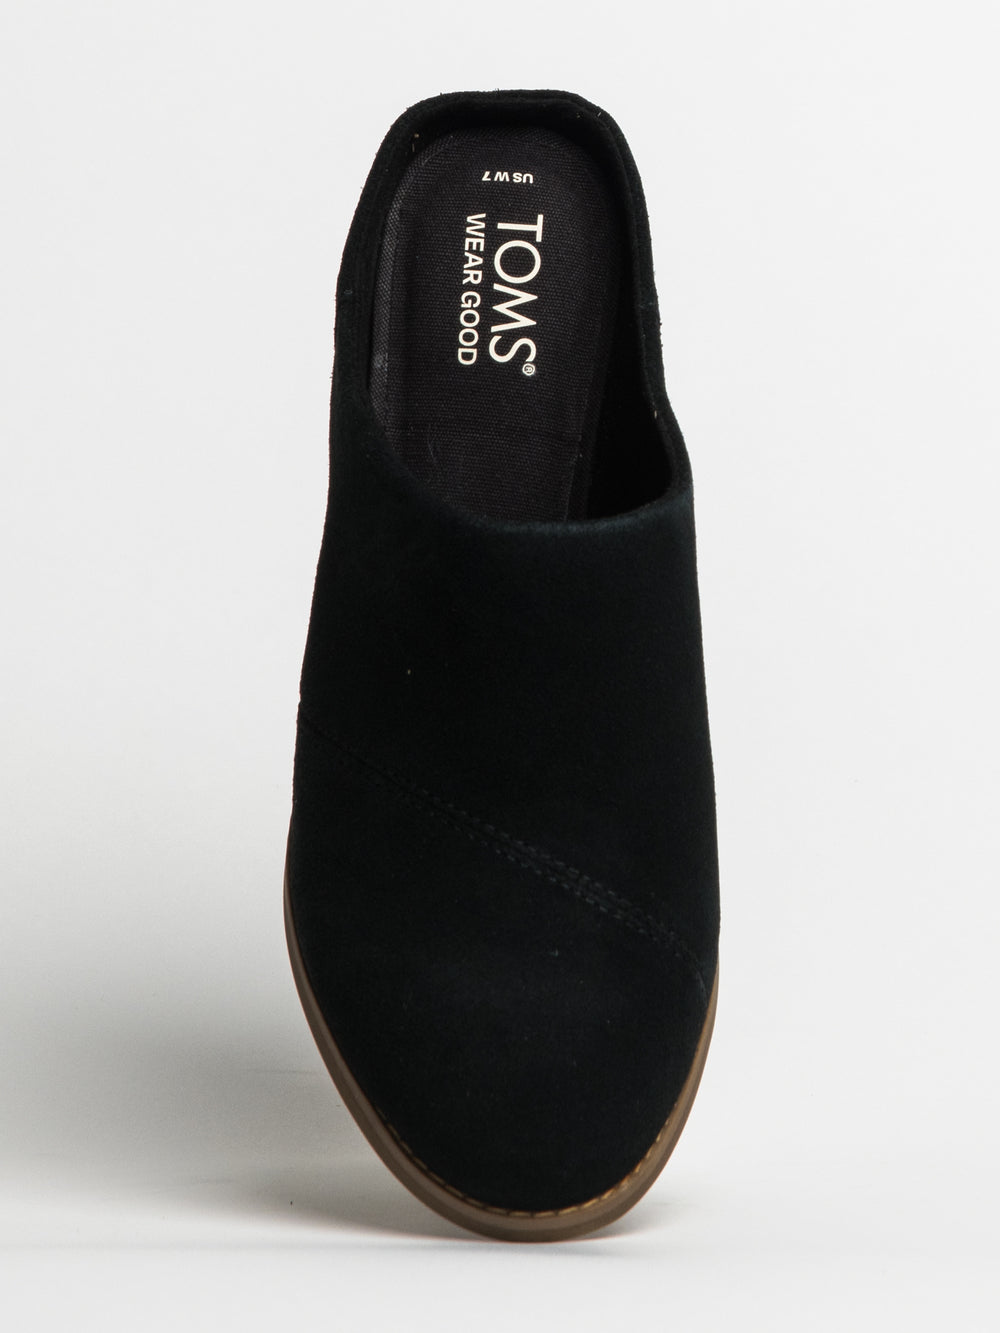 WOMENS TOMS EVELYN MULE